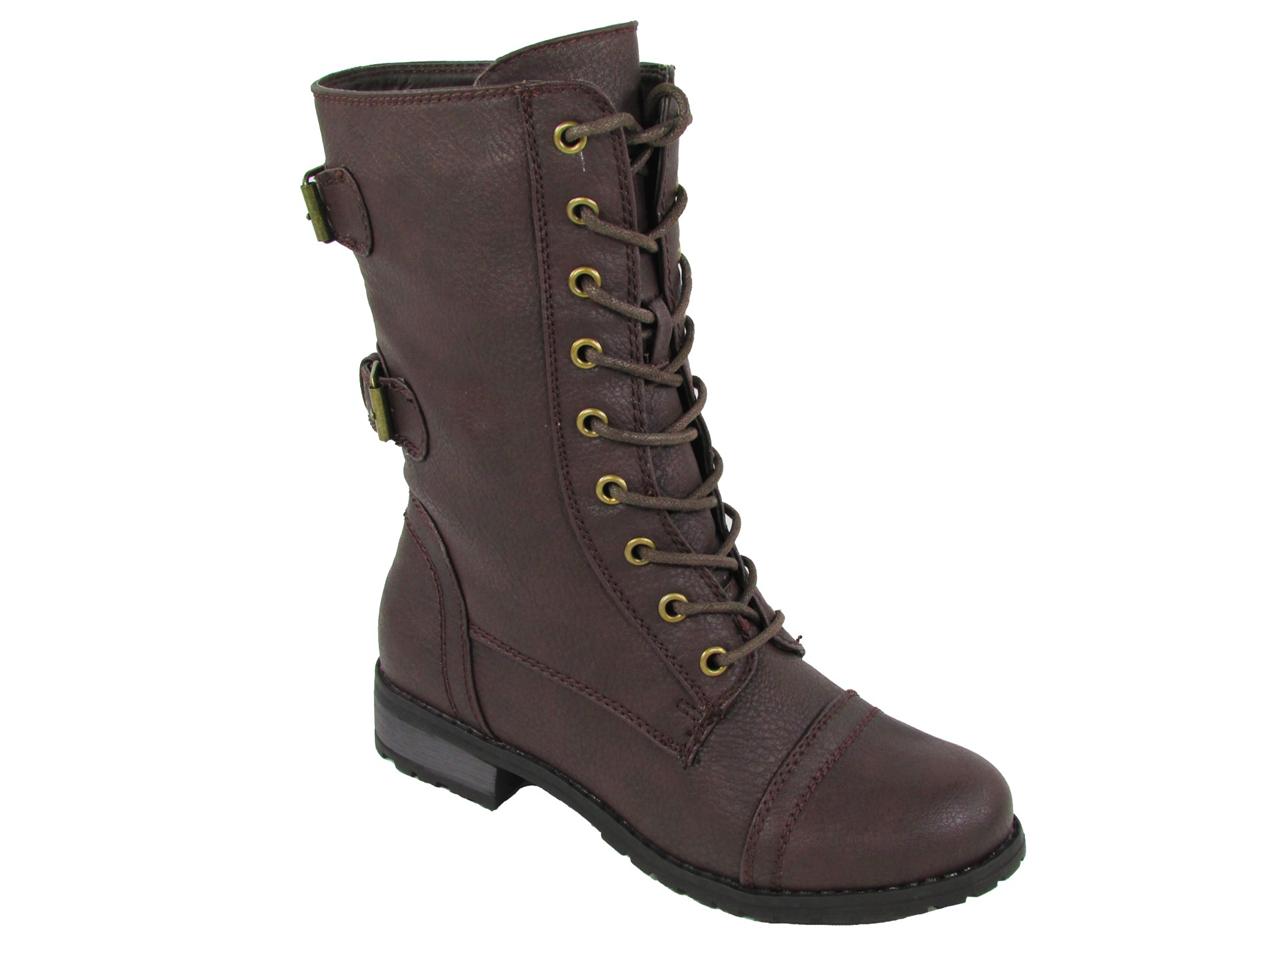 Wild Diva Timberly-02 Lace up Military Mid Calf Boot | eBay